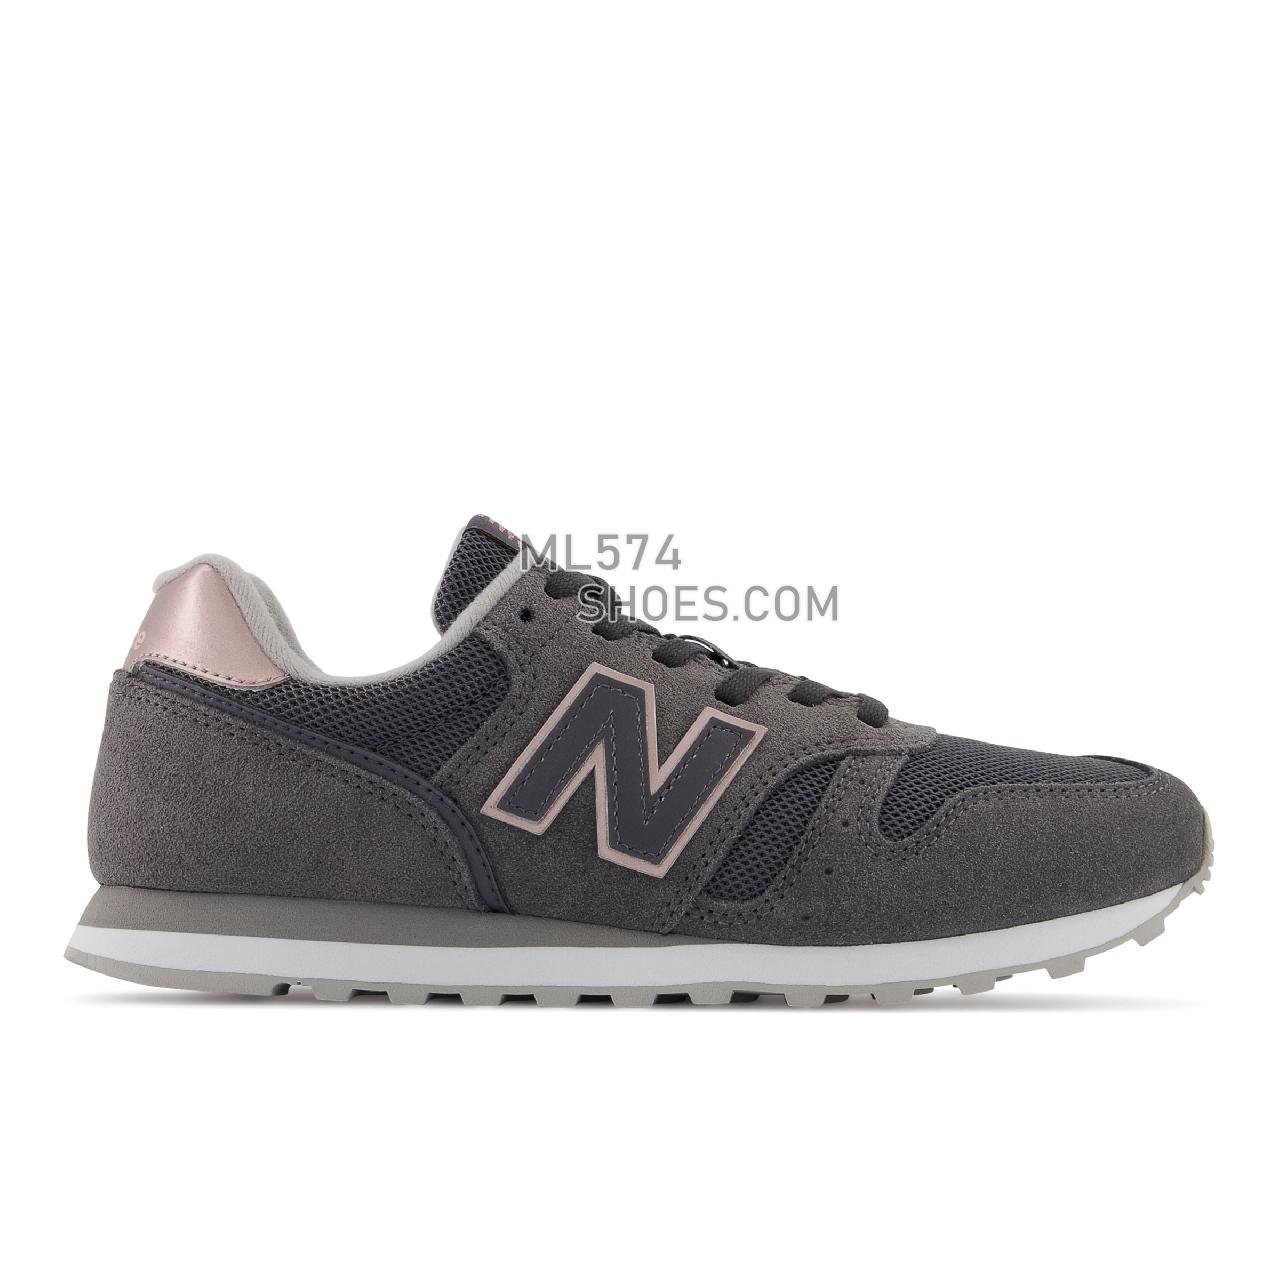 New Balance 373v2 - Women's Classic Sneakers - Magnet with Pink Metallic - WL373TF2